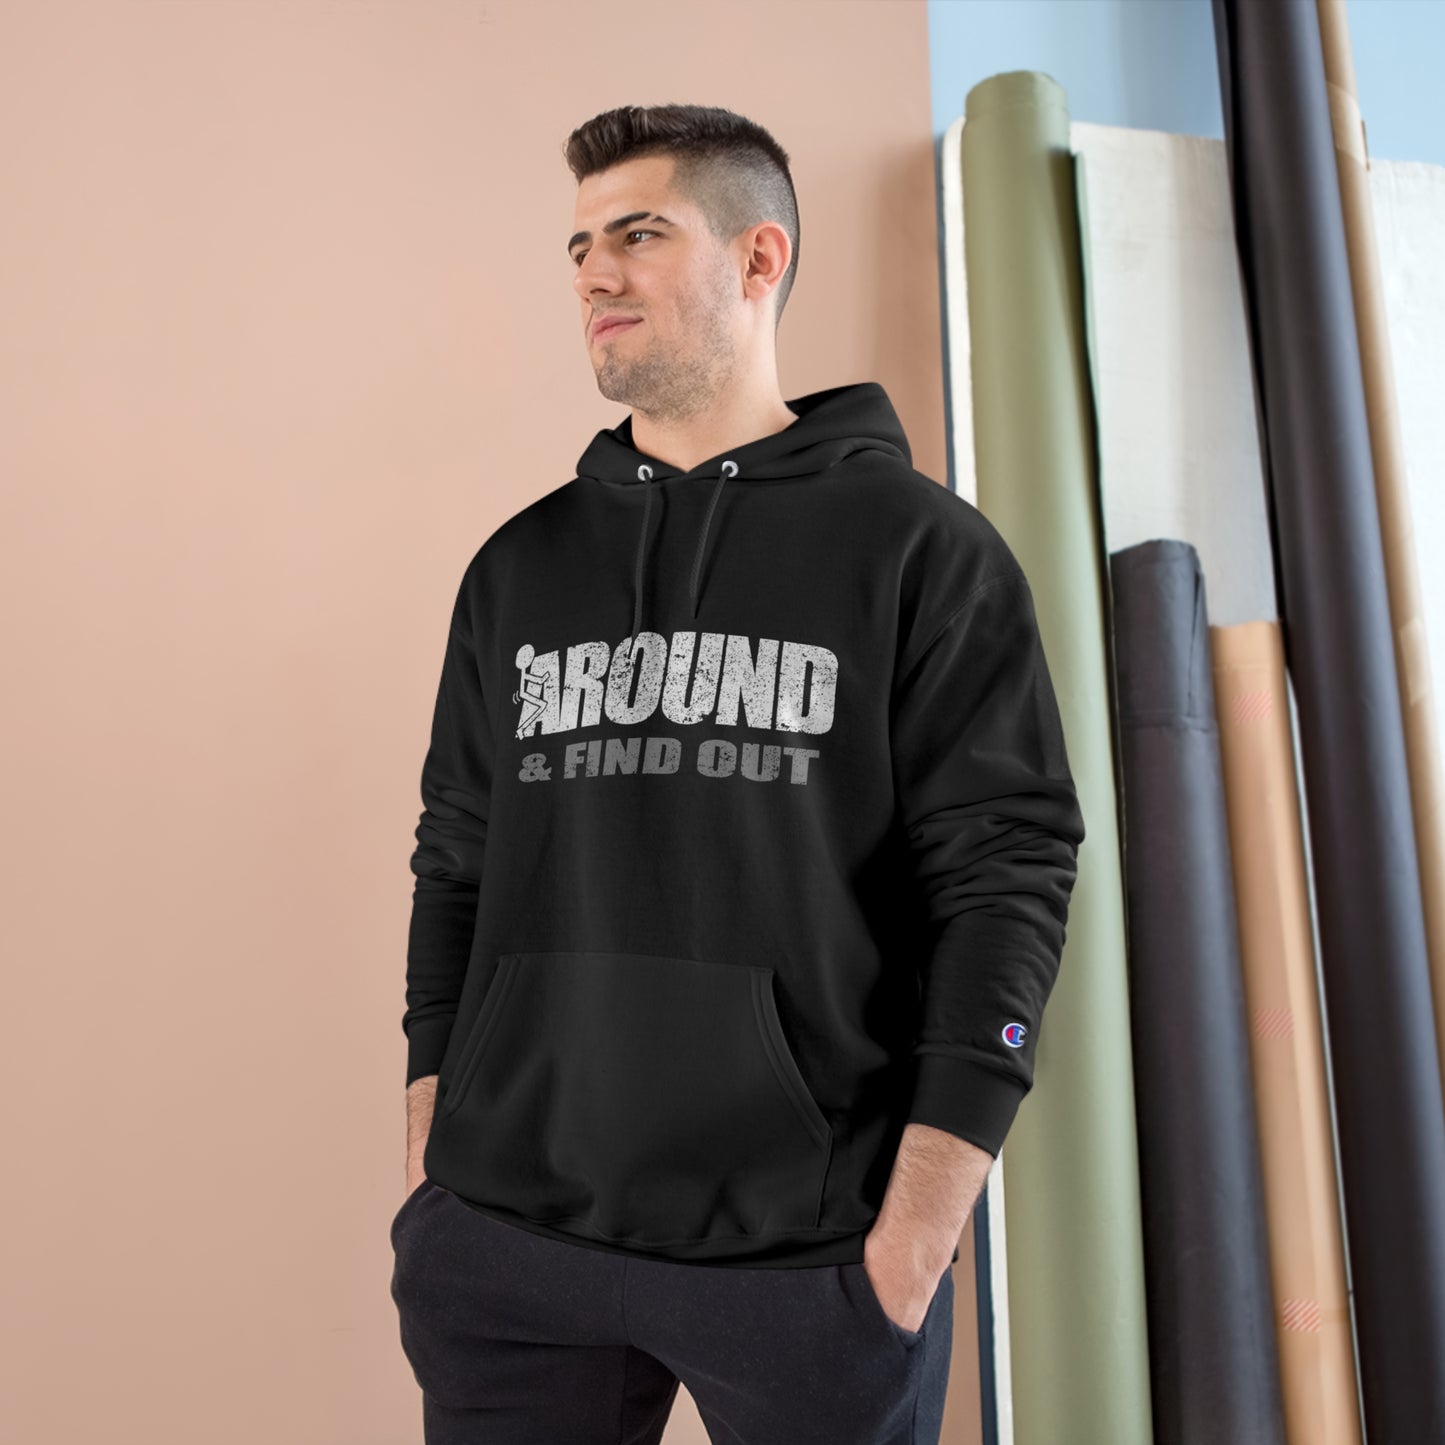 F#*k around and find out Champion Hoodie - Black / S - Black / M - Black / L - Black / XL - Black / 2XL